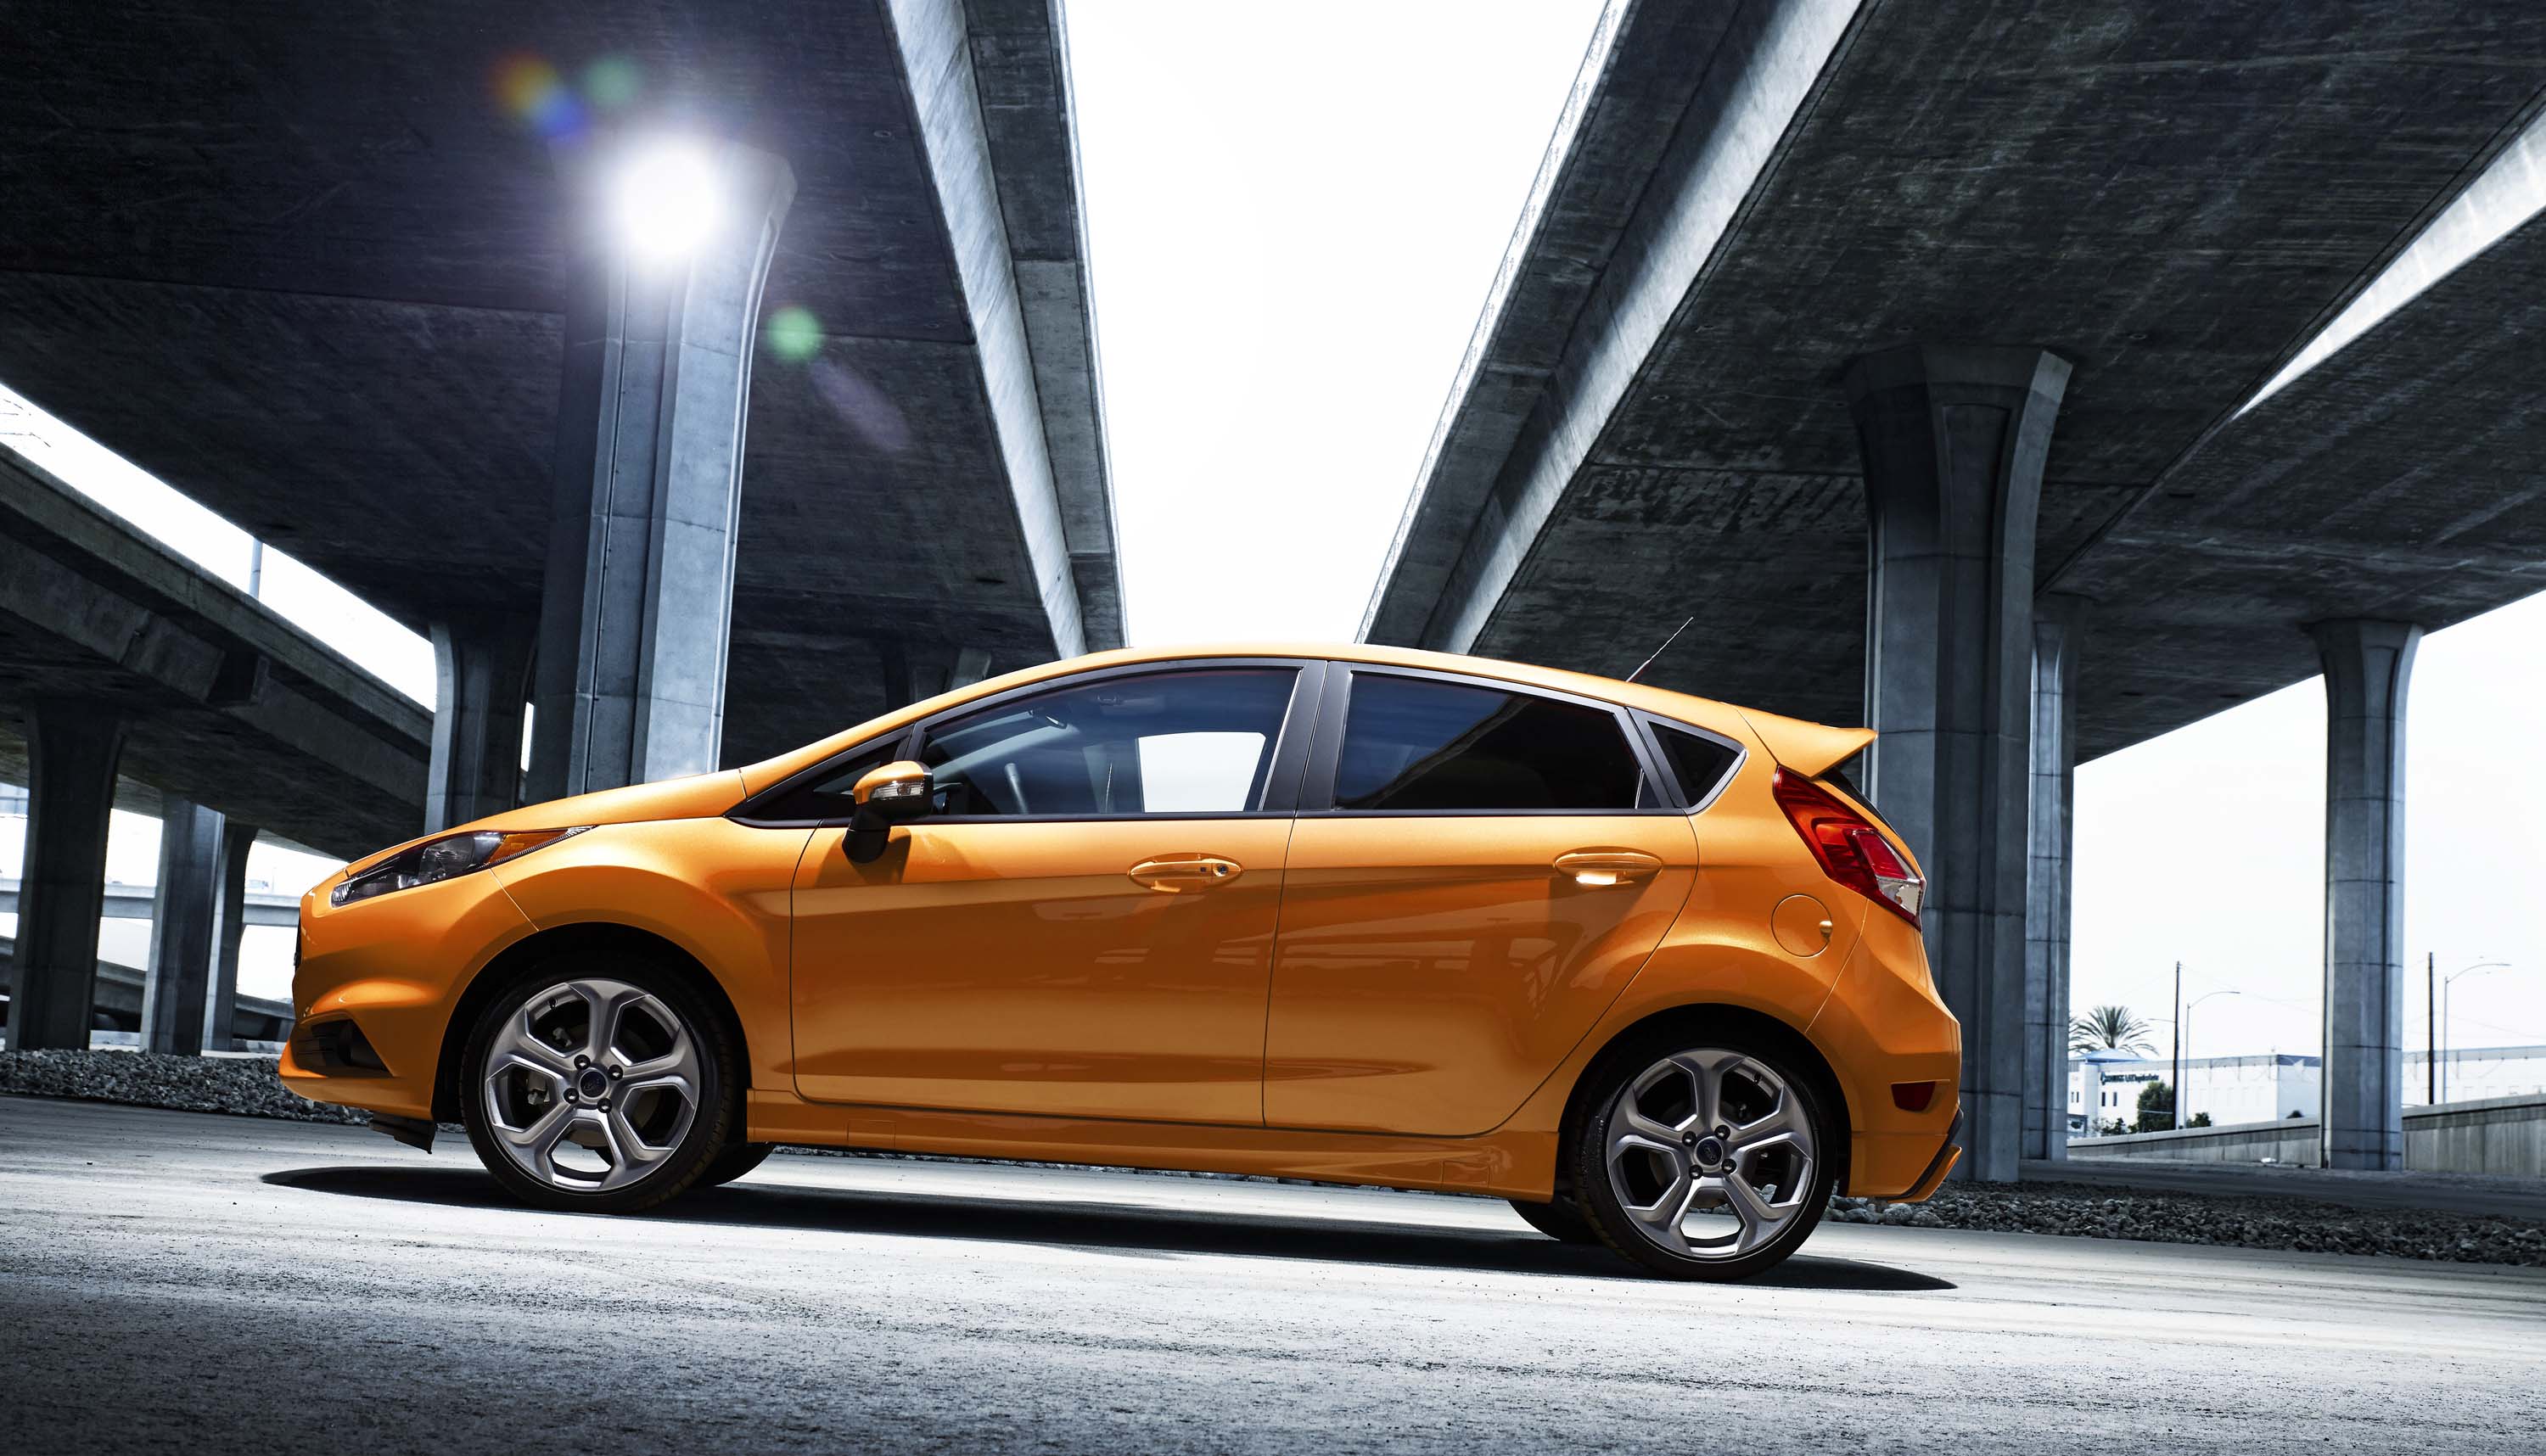 2019 Ford Fiesta Price, Value, Ratings & Reviews